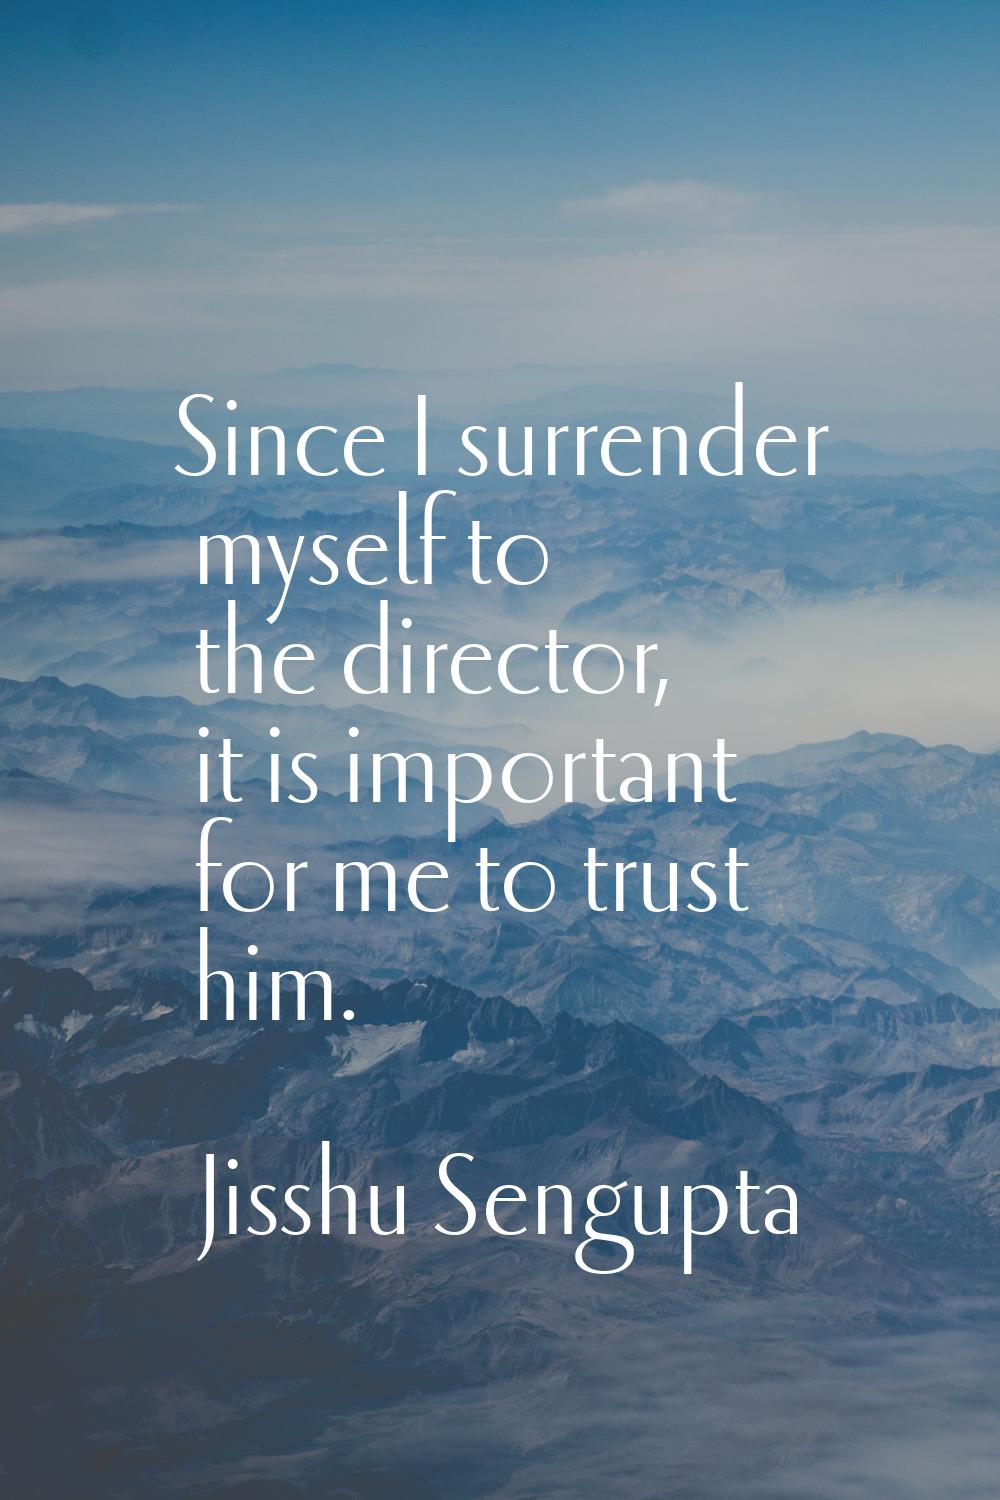 Since I surrender myself to the director, it is important for me to trust him.